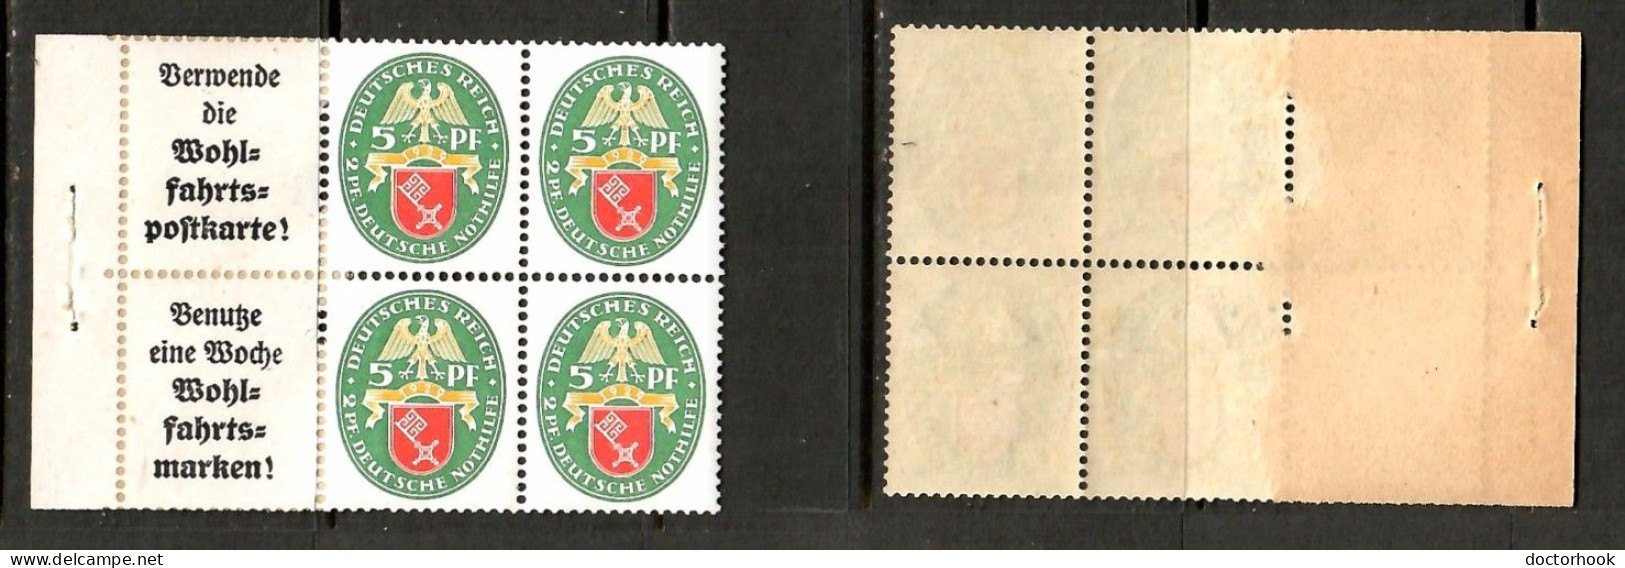 GERMANY   Scott # B 28* MINT OG BOOKLET PANE Of 4 + 2 LABELS (PAPER ADHESION)  (CONDITION AS PER SCAN) (LG-1764) - Markenheftchen  & Se-tenant